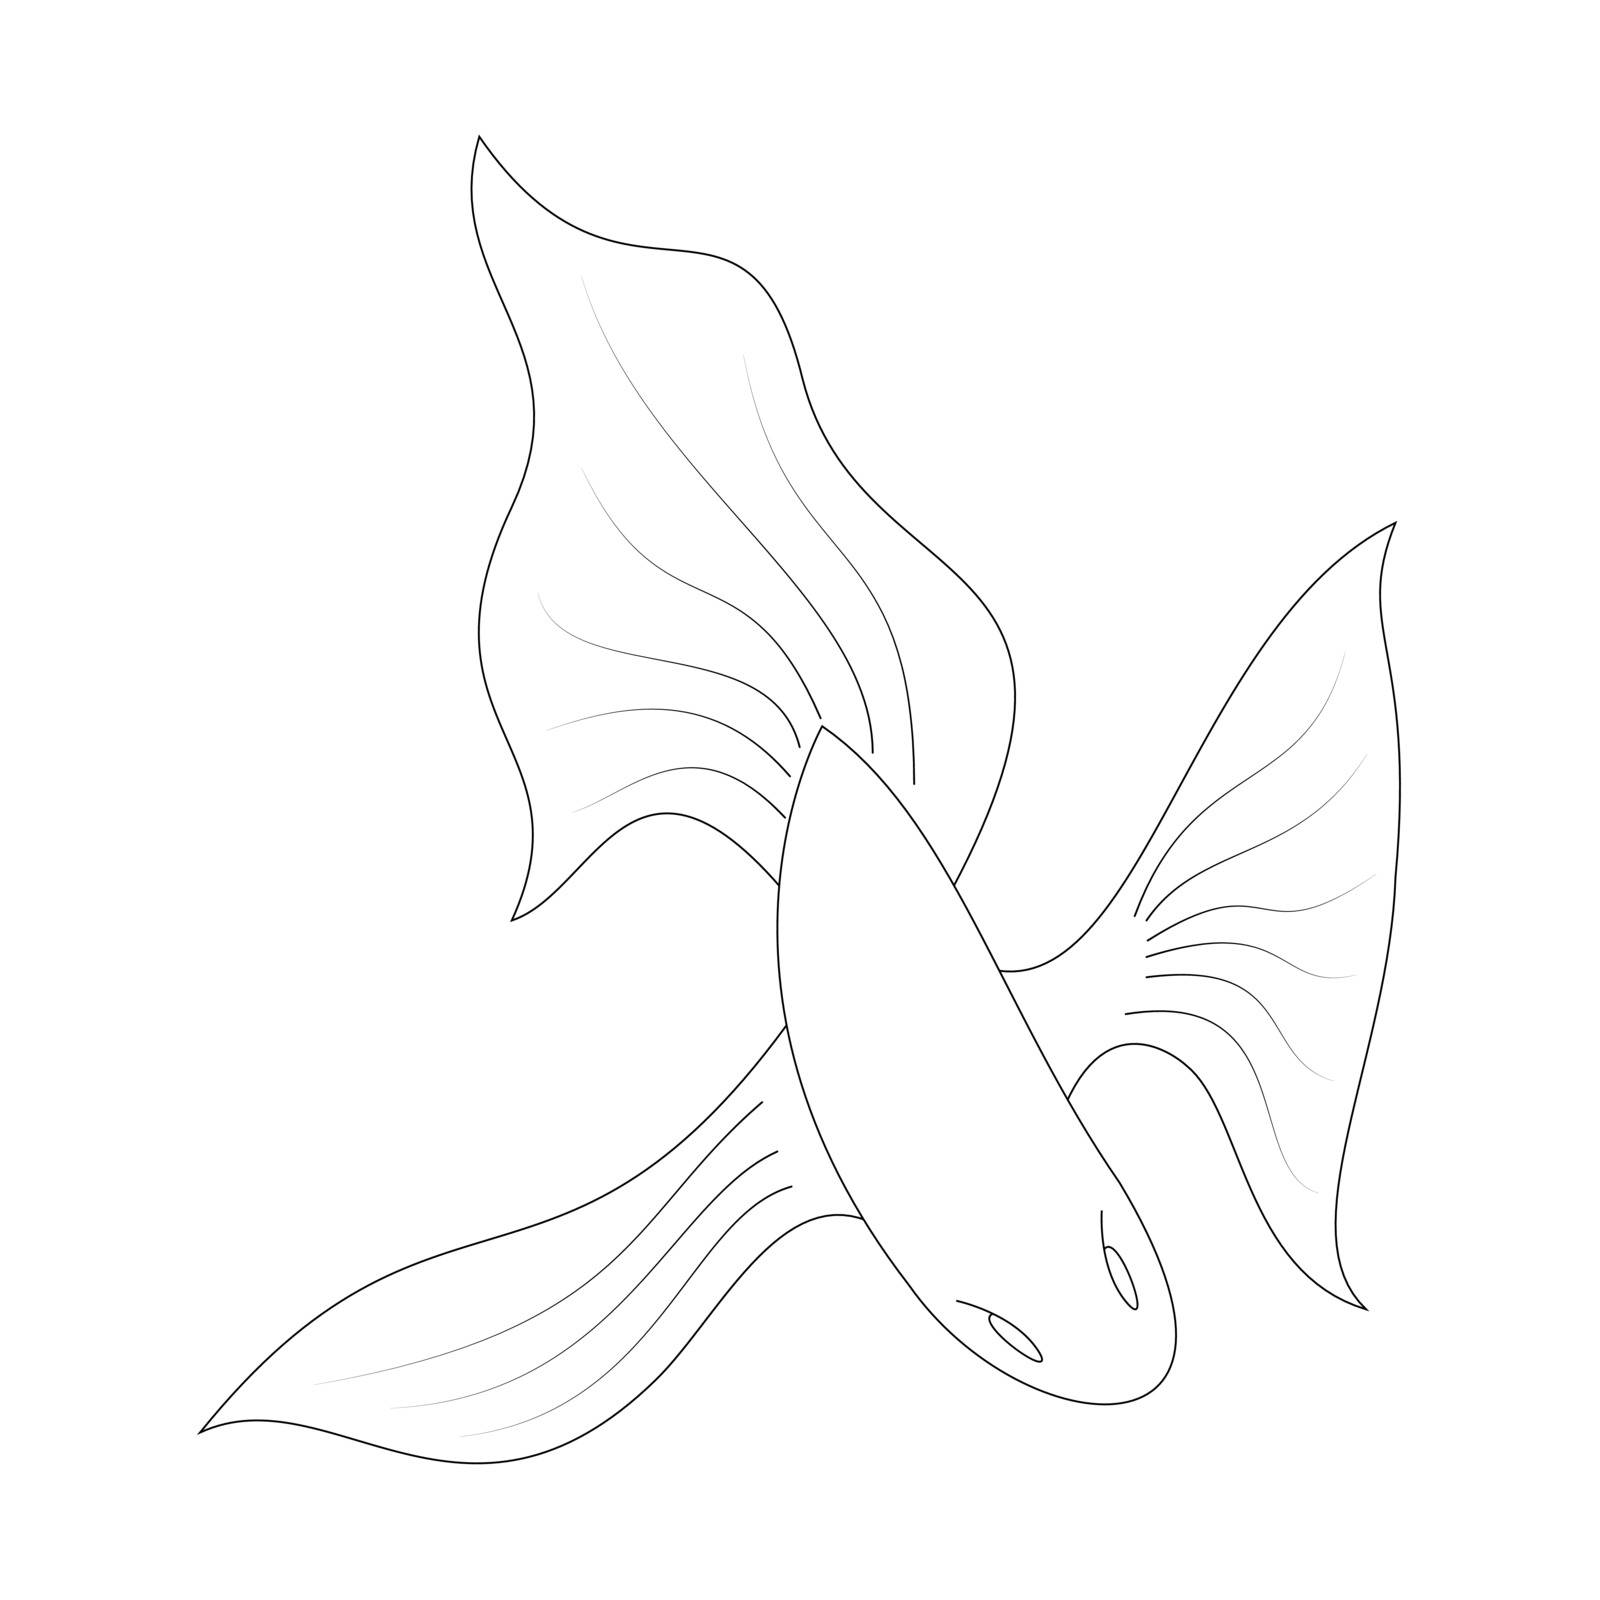 Cartoon goldfish outline. Vector illustration isolated on white background. Decoration for greeting cards, posters, flyers, prints for clothes.